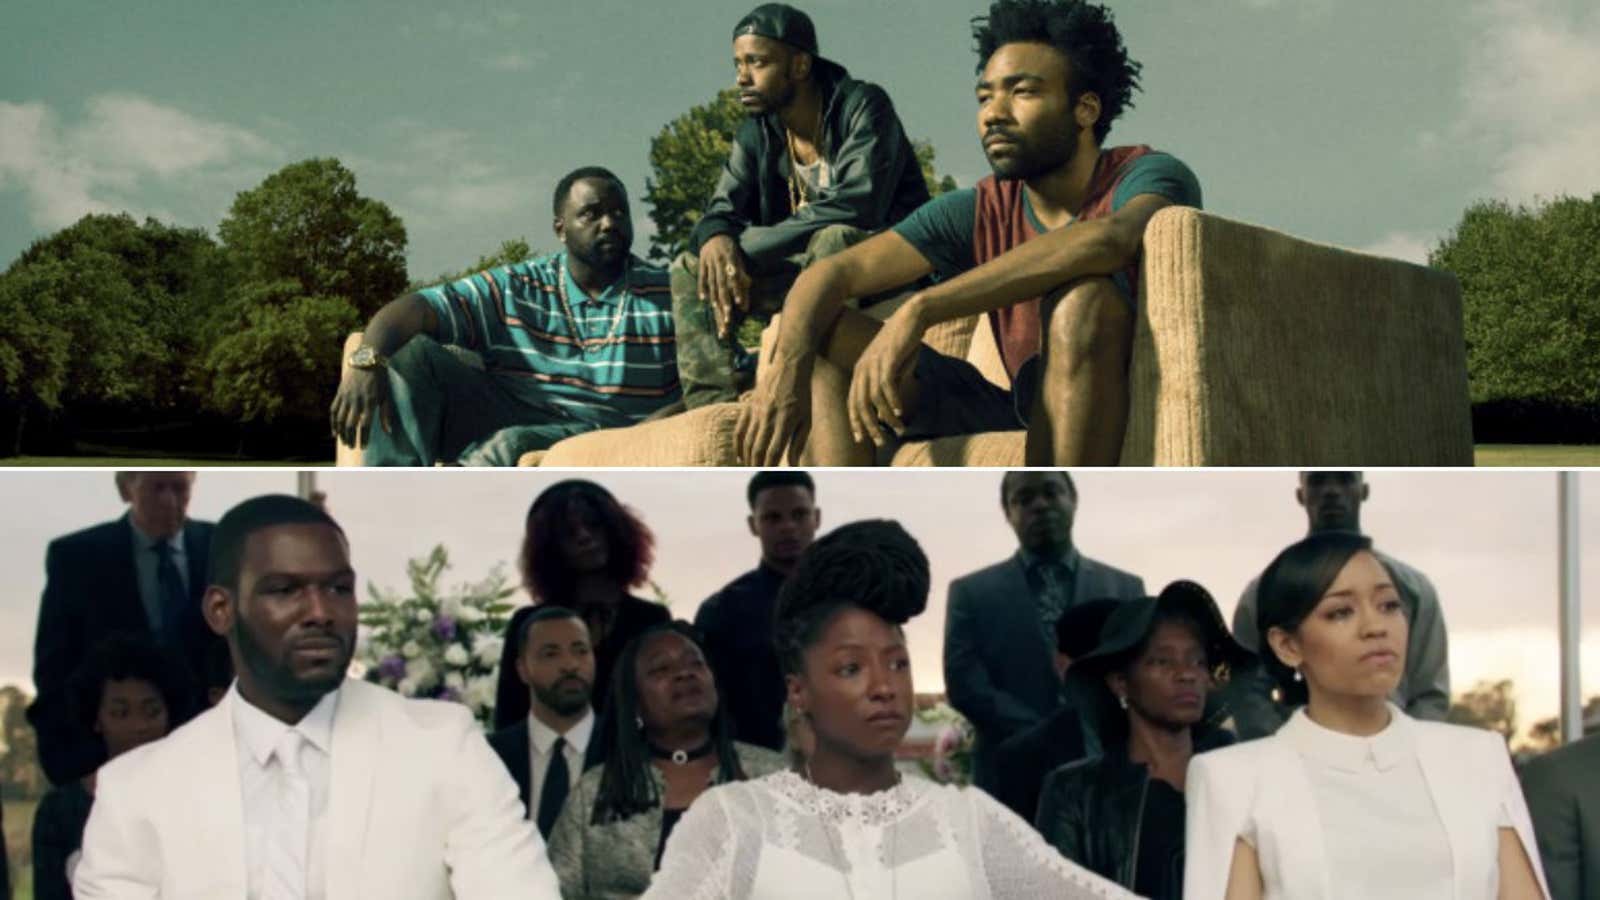 The casts of FX’s “Atlanta” (top) and OWN’s “Queen Sugar” (bottom).